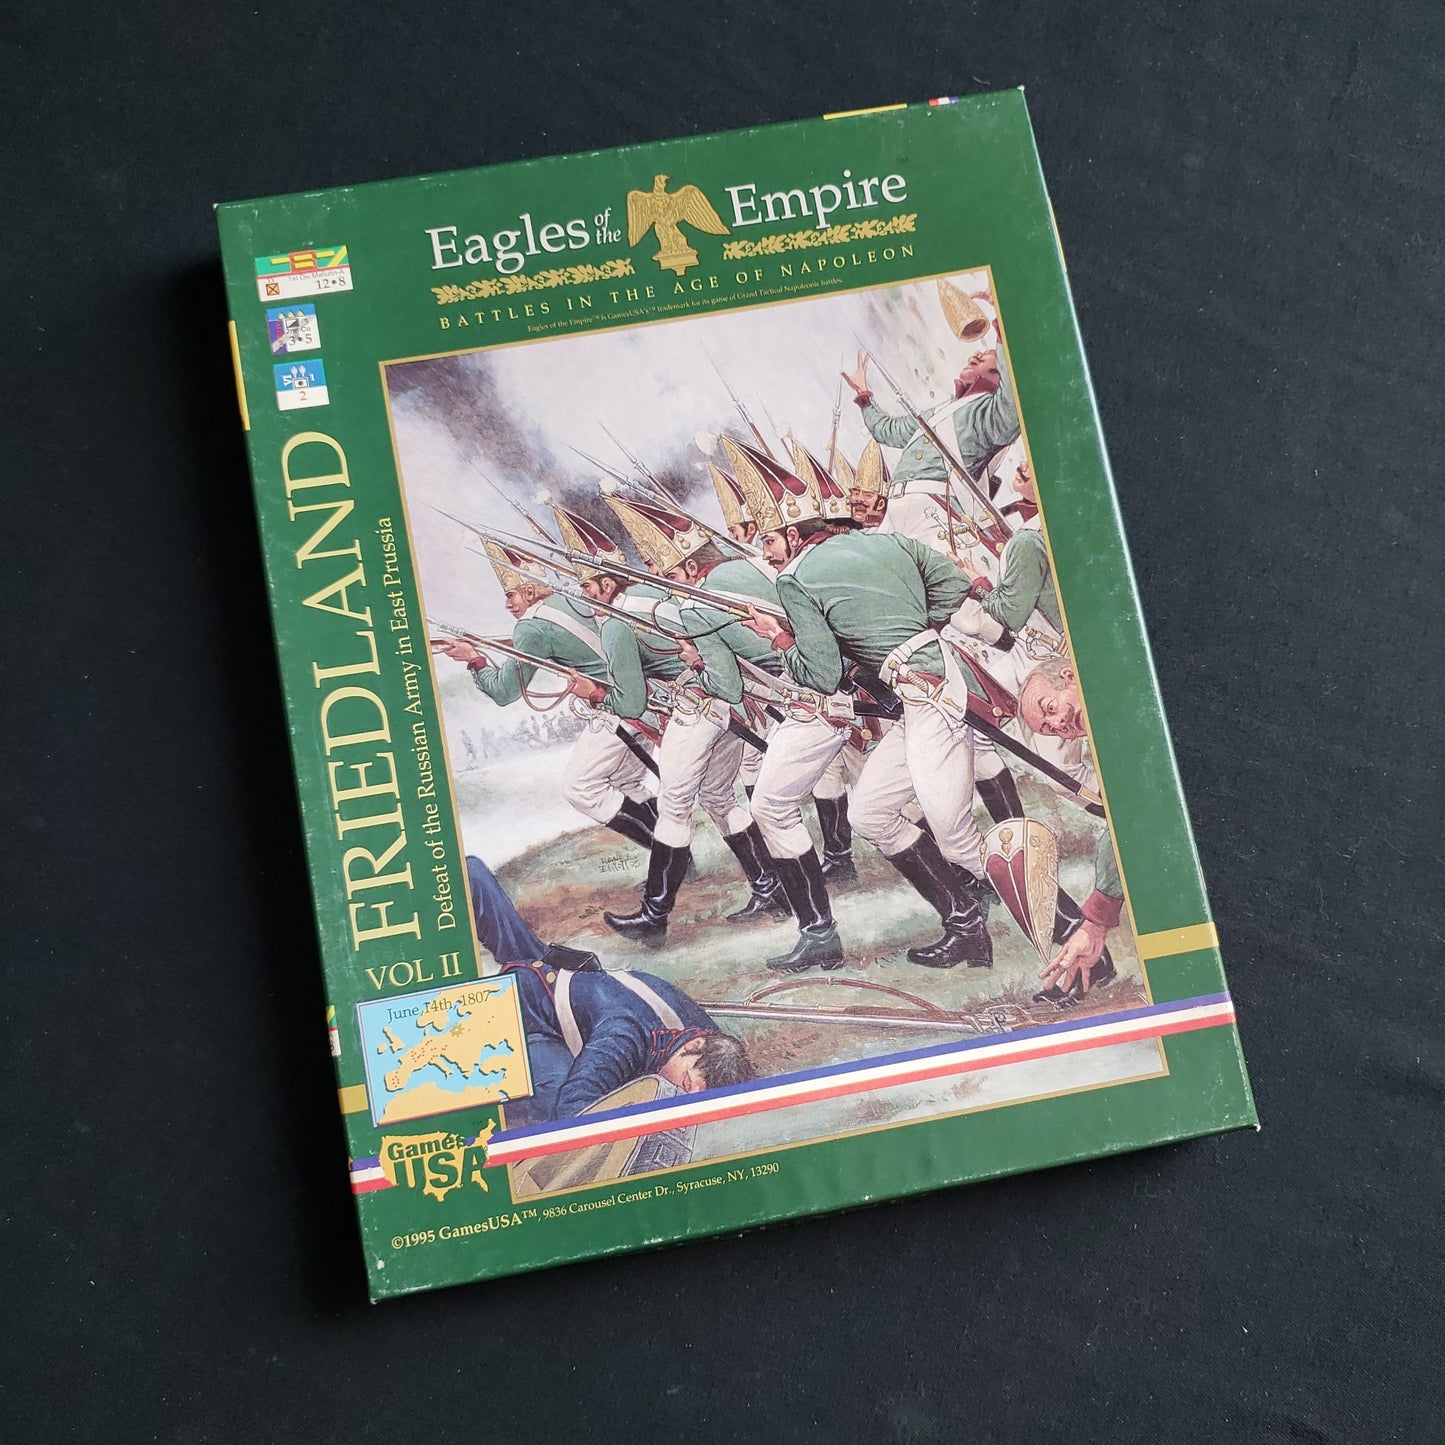 Image shows the front cover of the box of the Eagles of the Empire: Friedland board game